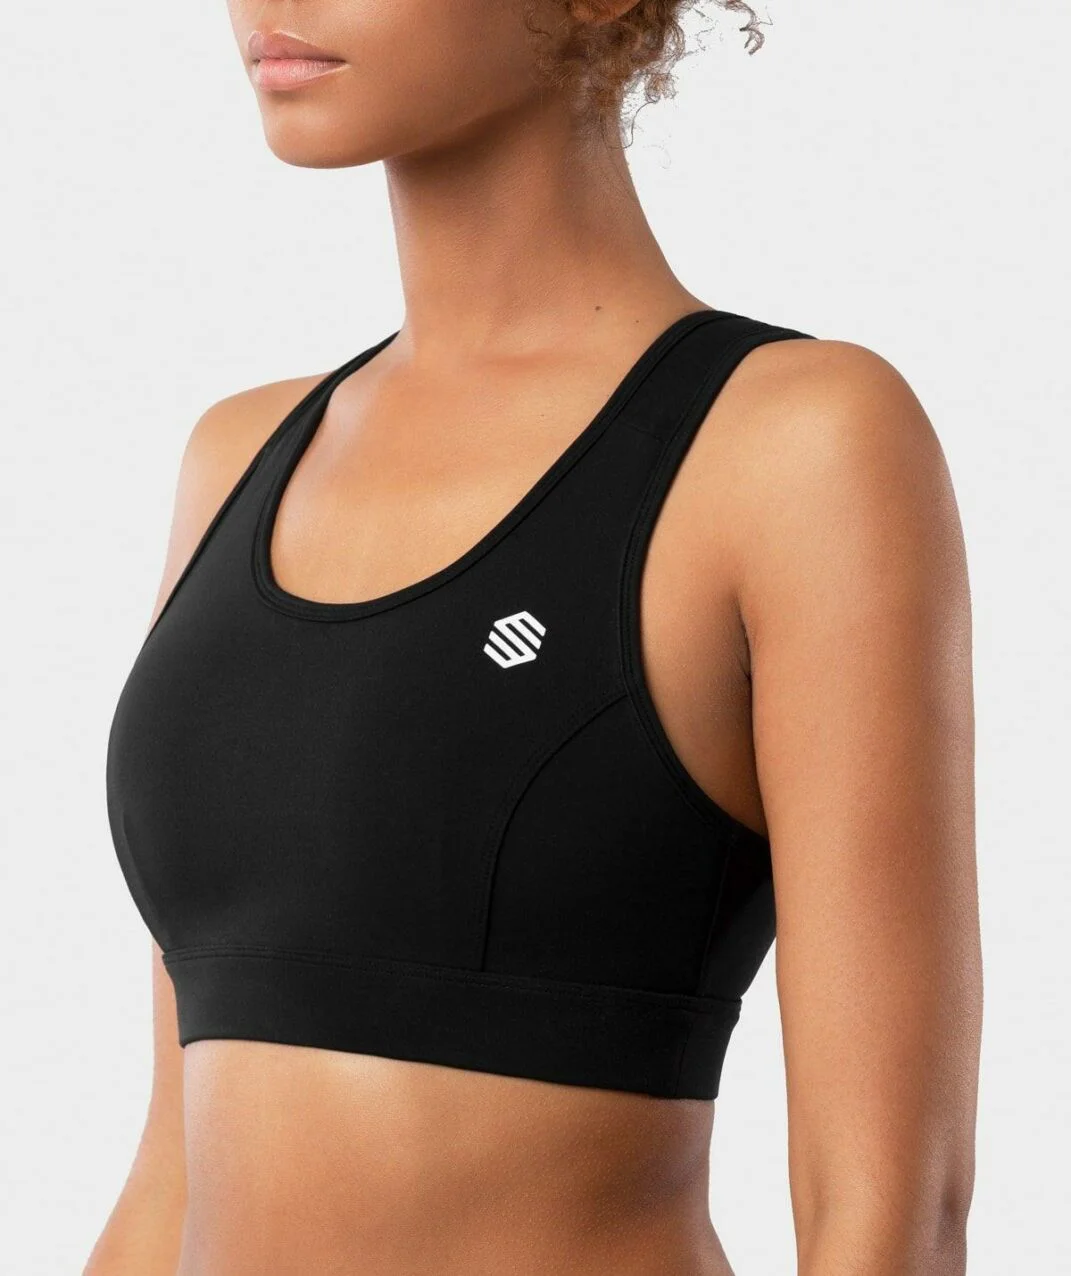 How to Prevent Nipples Showing Through Sports Bra